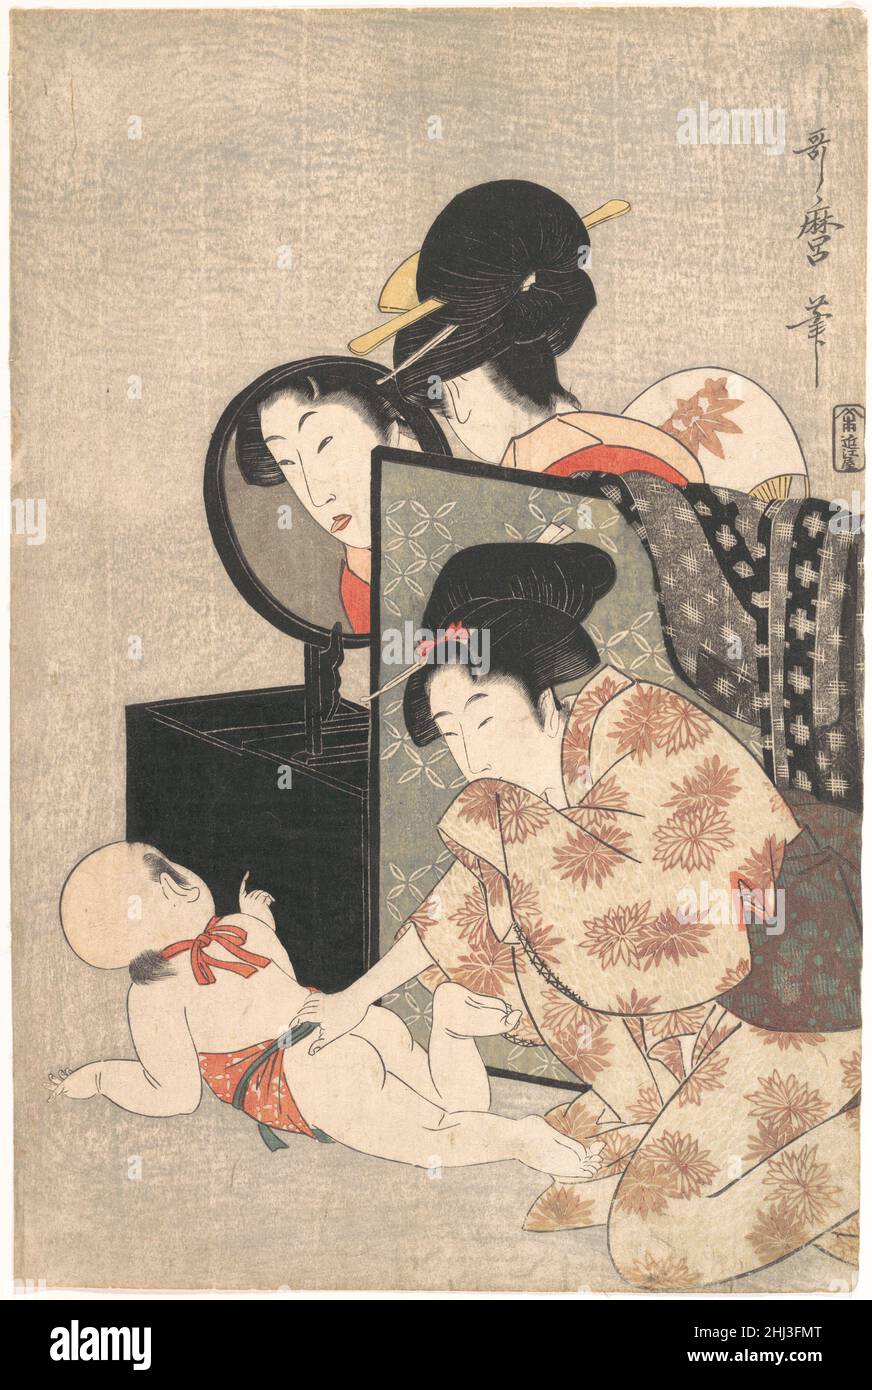 Mother and Child ca. 1793 Kitagawa Utamaro Japanese Utamaro composed this image with considerable skill and humor, creating a circular movement through gazes and gestures. The mother, seated behind a freestanding screen, sticks out her tongue at her child. When the child responds to her reflection with an outstretched hand, another woman reacts with laughter and grasps the child's belt.. Mother and Child  54865 Stock Photo